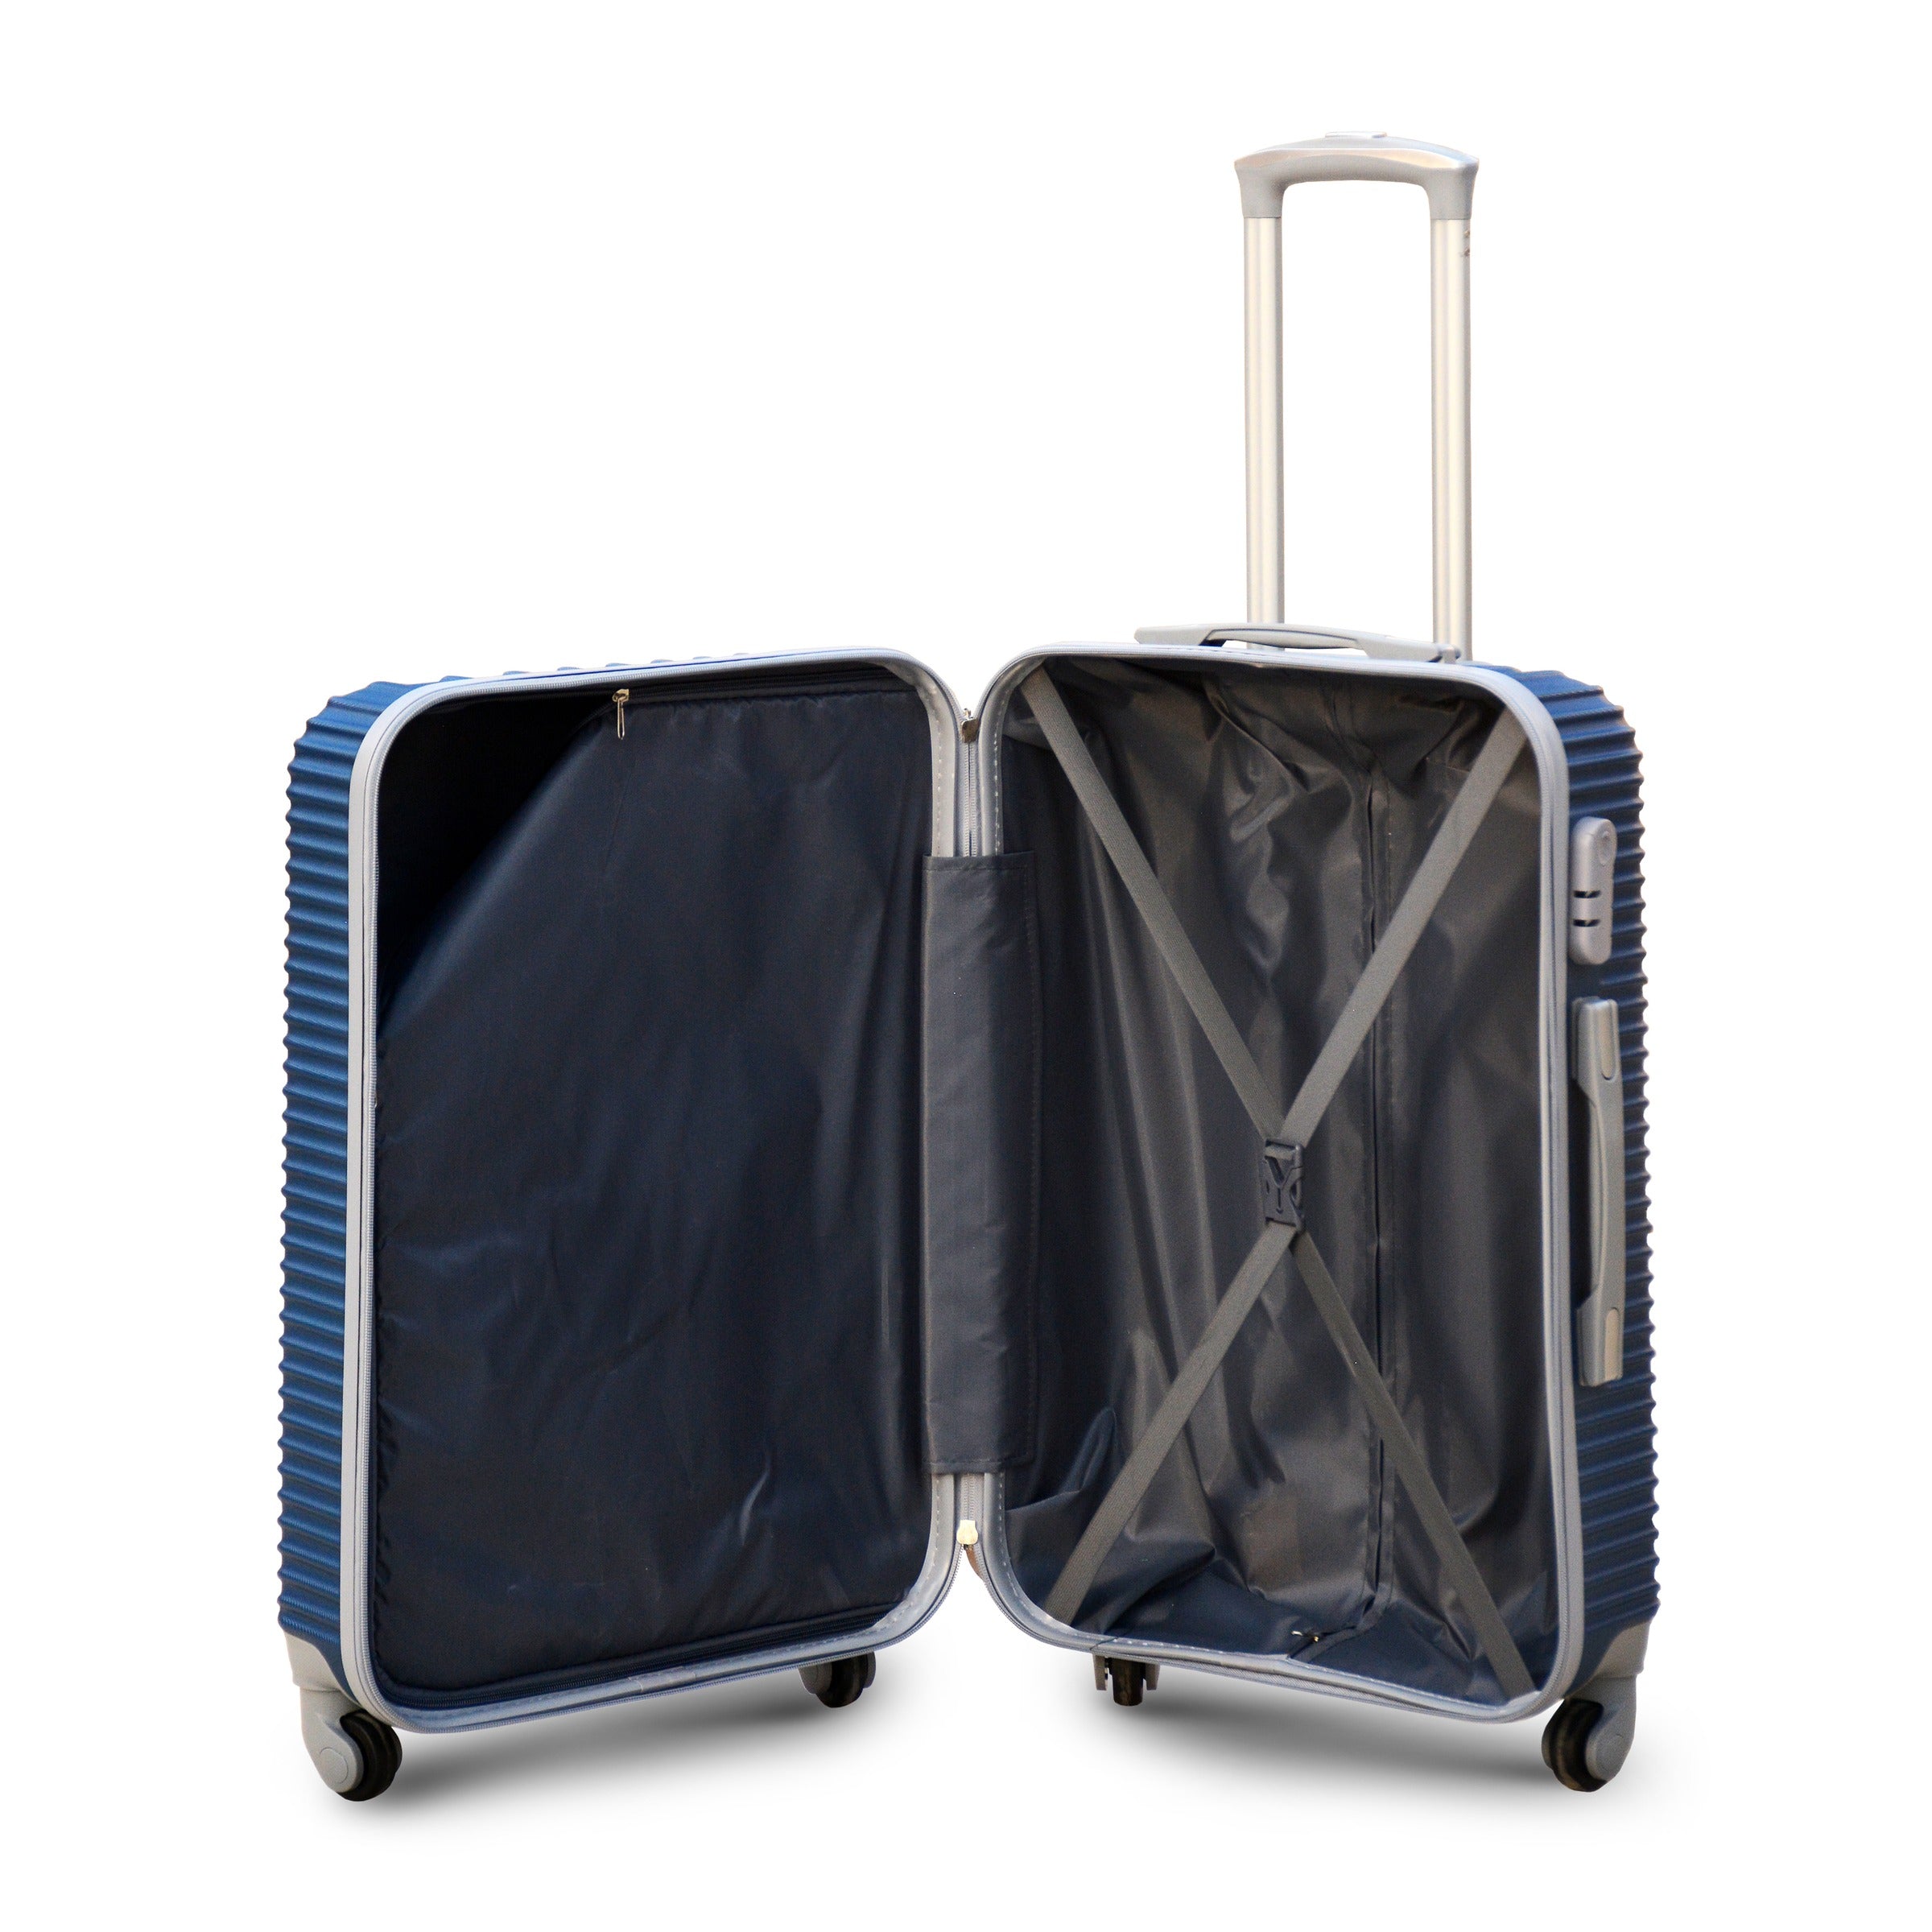 3 Pcs Set 20” 24” 28 Inches Skyline ABS Blue Lightweight ABS Luggage | Hard Case Trolley Bag | 2 Years Warranty - 0091